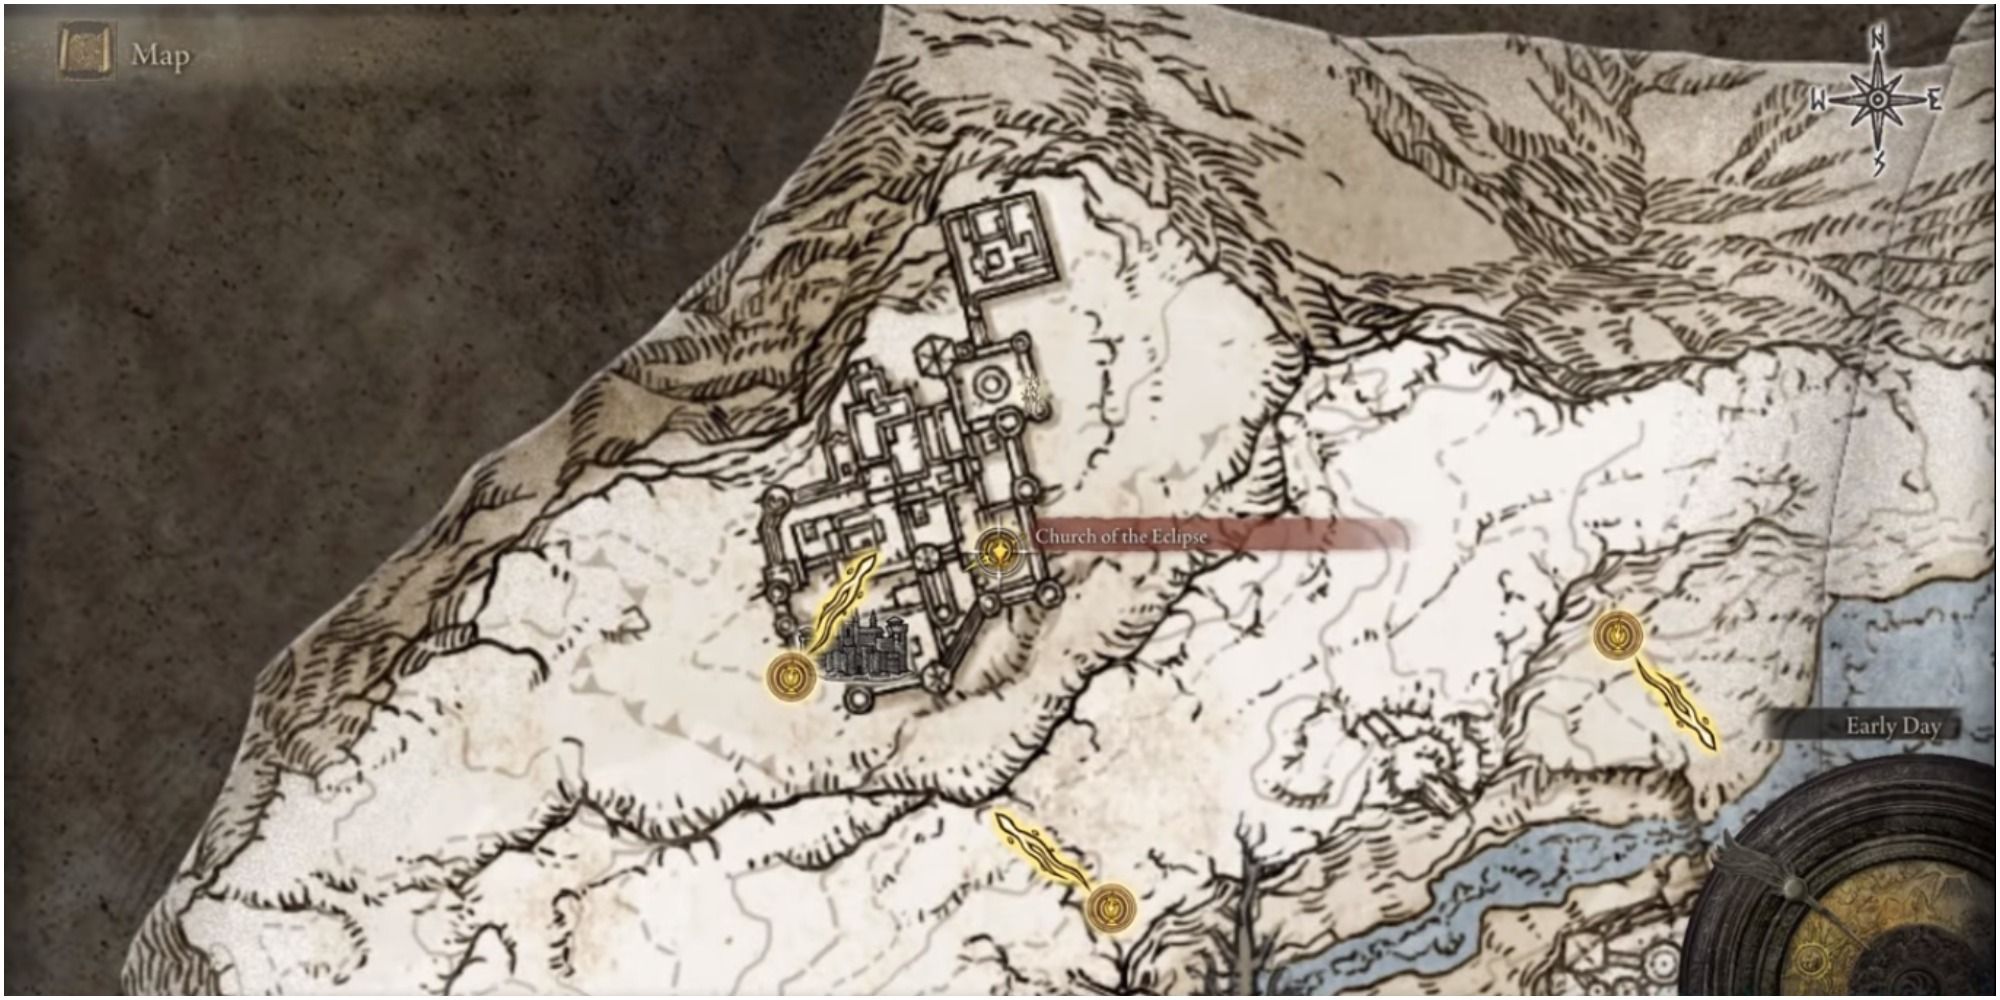 The map showing the location of Castle Sol. 